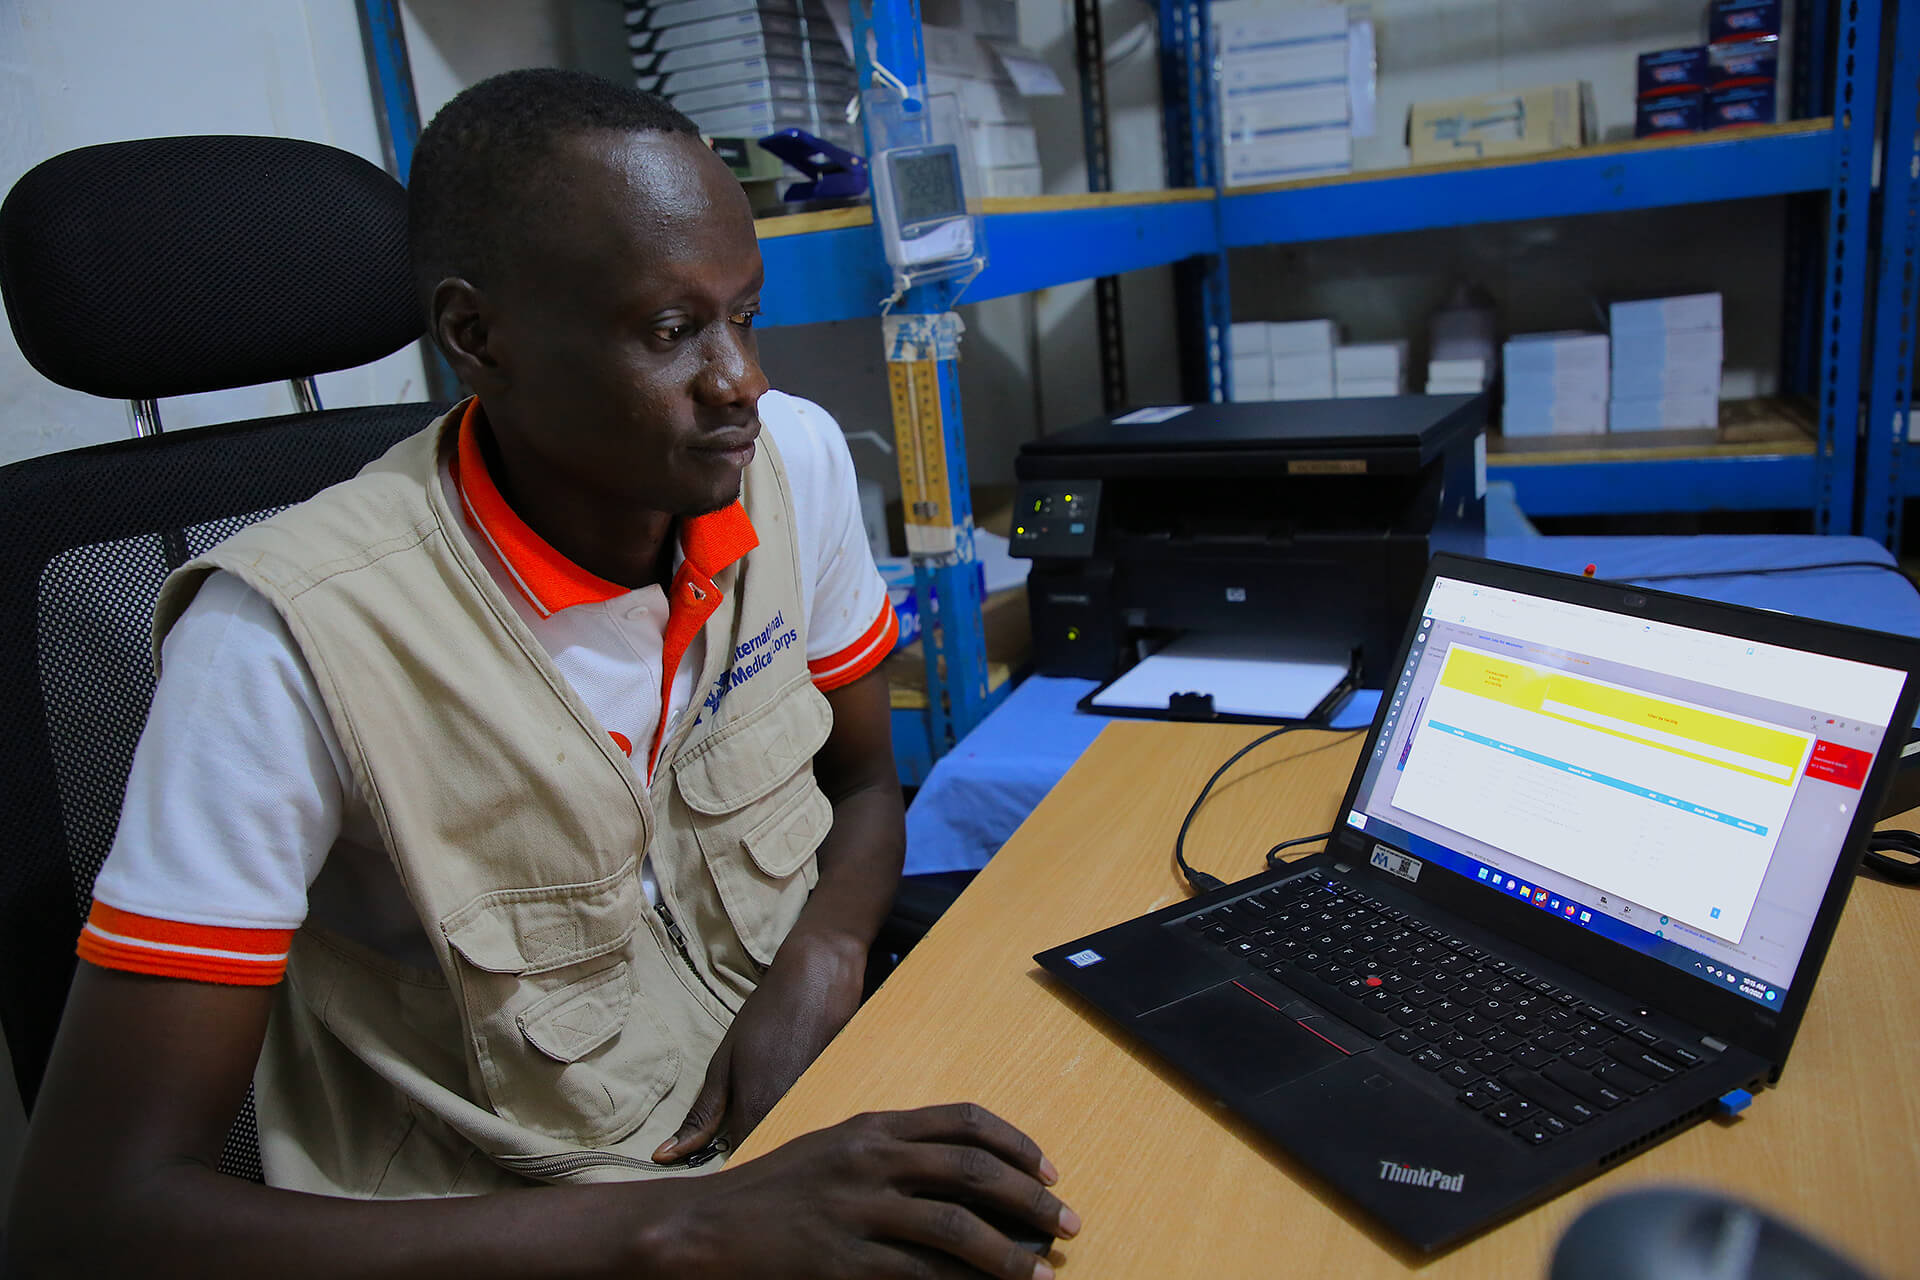 Nhial Bol, Pharmacy Supervisor in charge of the Juba IDP camps, uses PIMS to analyze consumption and prepare a re-supply request.